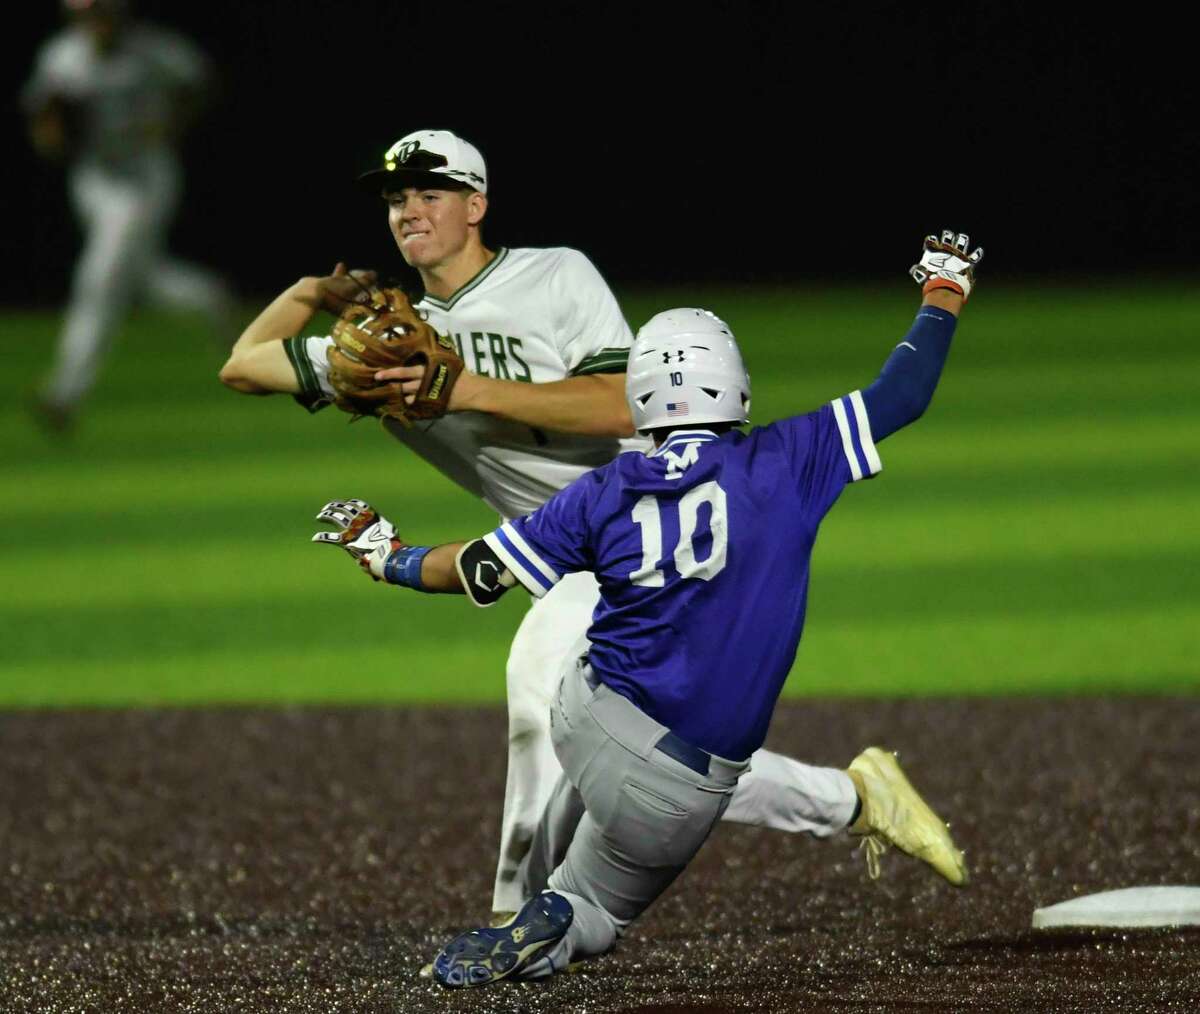 Reagan second baseman Jacob Burcham turns a double play as MacArthur's Jacob Gilbert slides in to end the game during the 27-6A baseball action at the NEISD Sports Park on Tuesday, April 23, 2019.